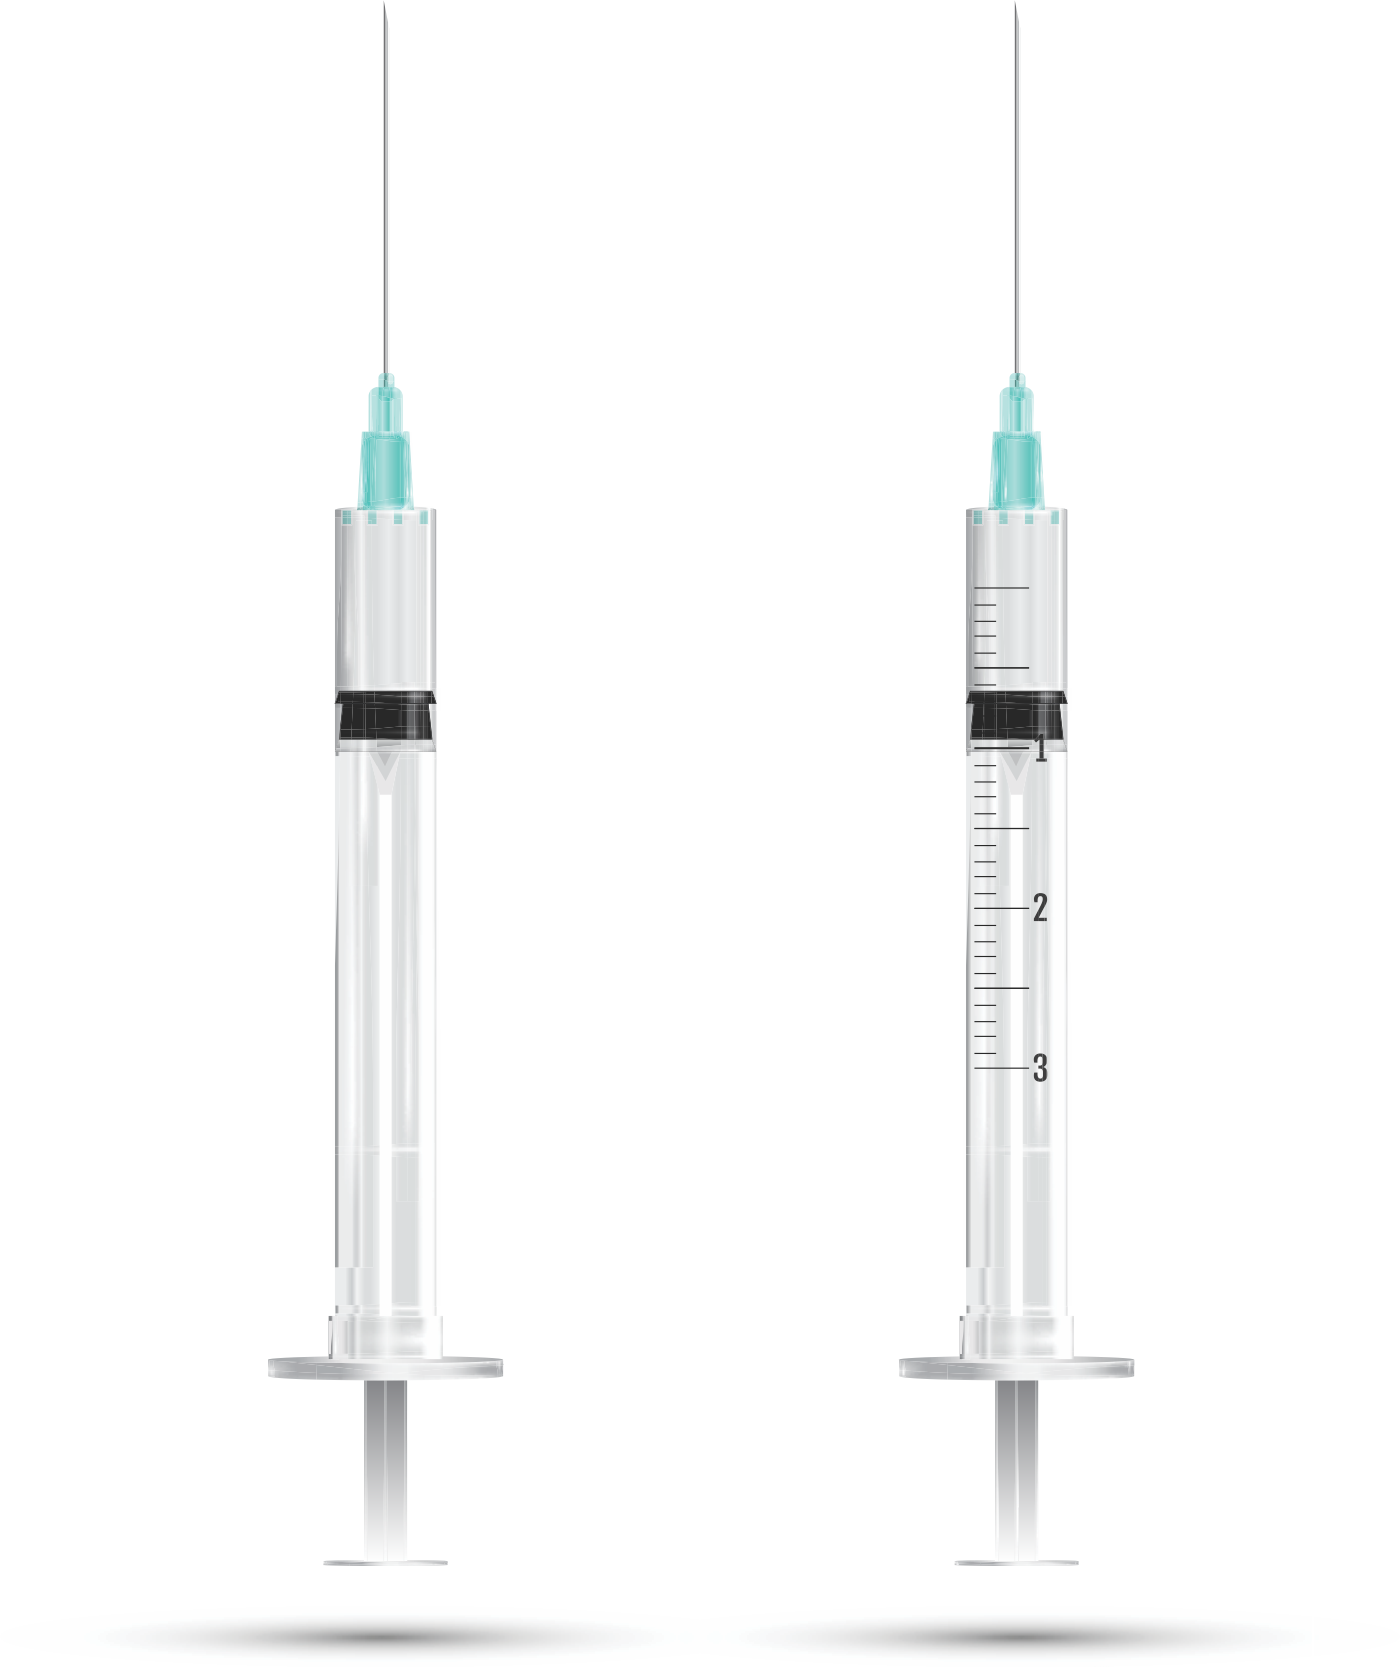 NEEDLES-CANNULA-SYRINGES for invasive procedures